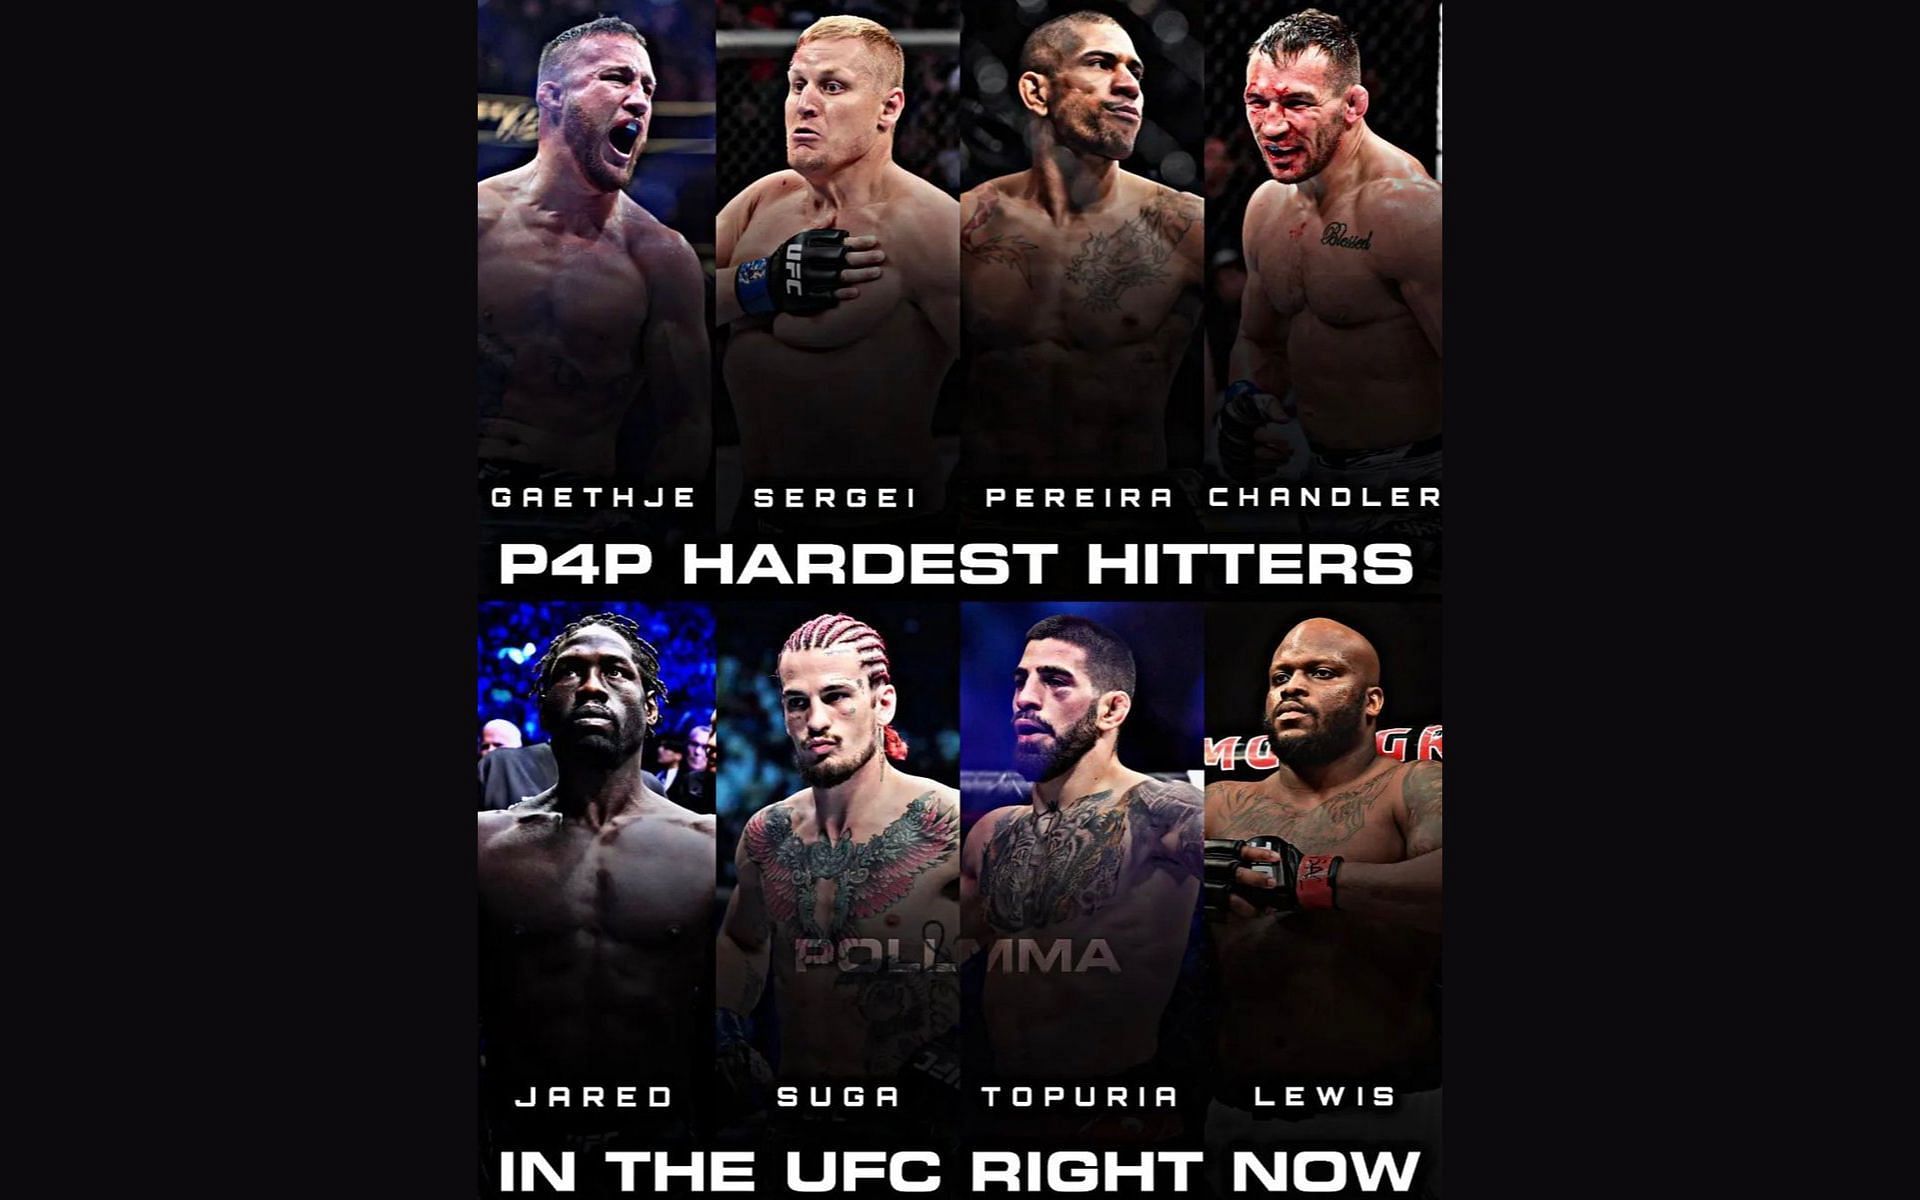 The fan-made list of hardest hitters in the UFC. [via X]